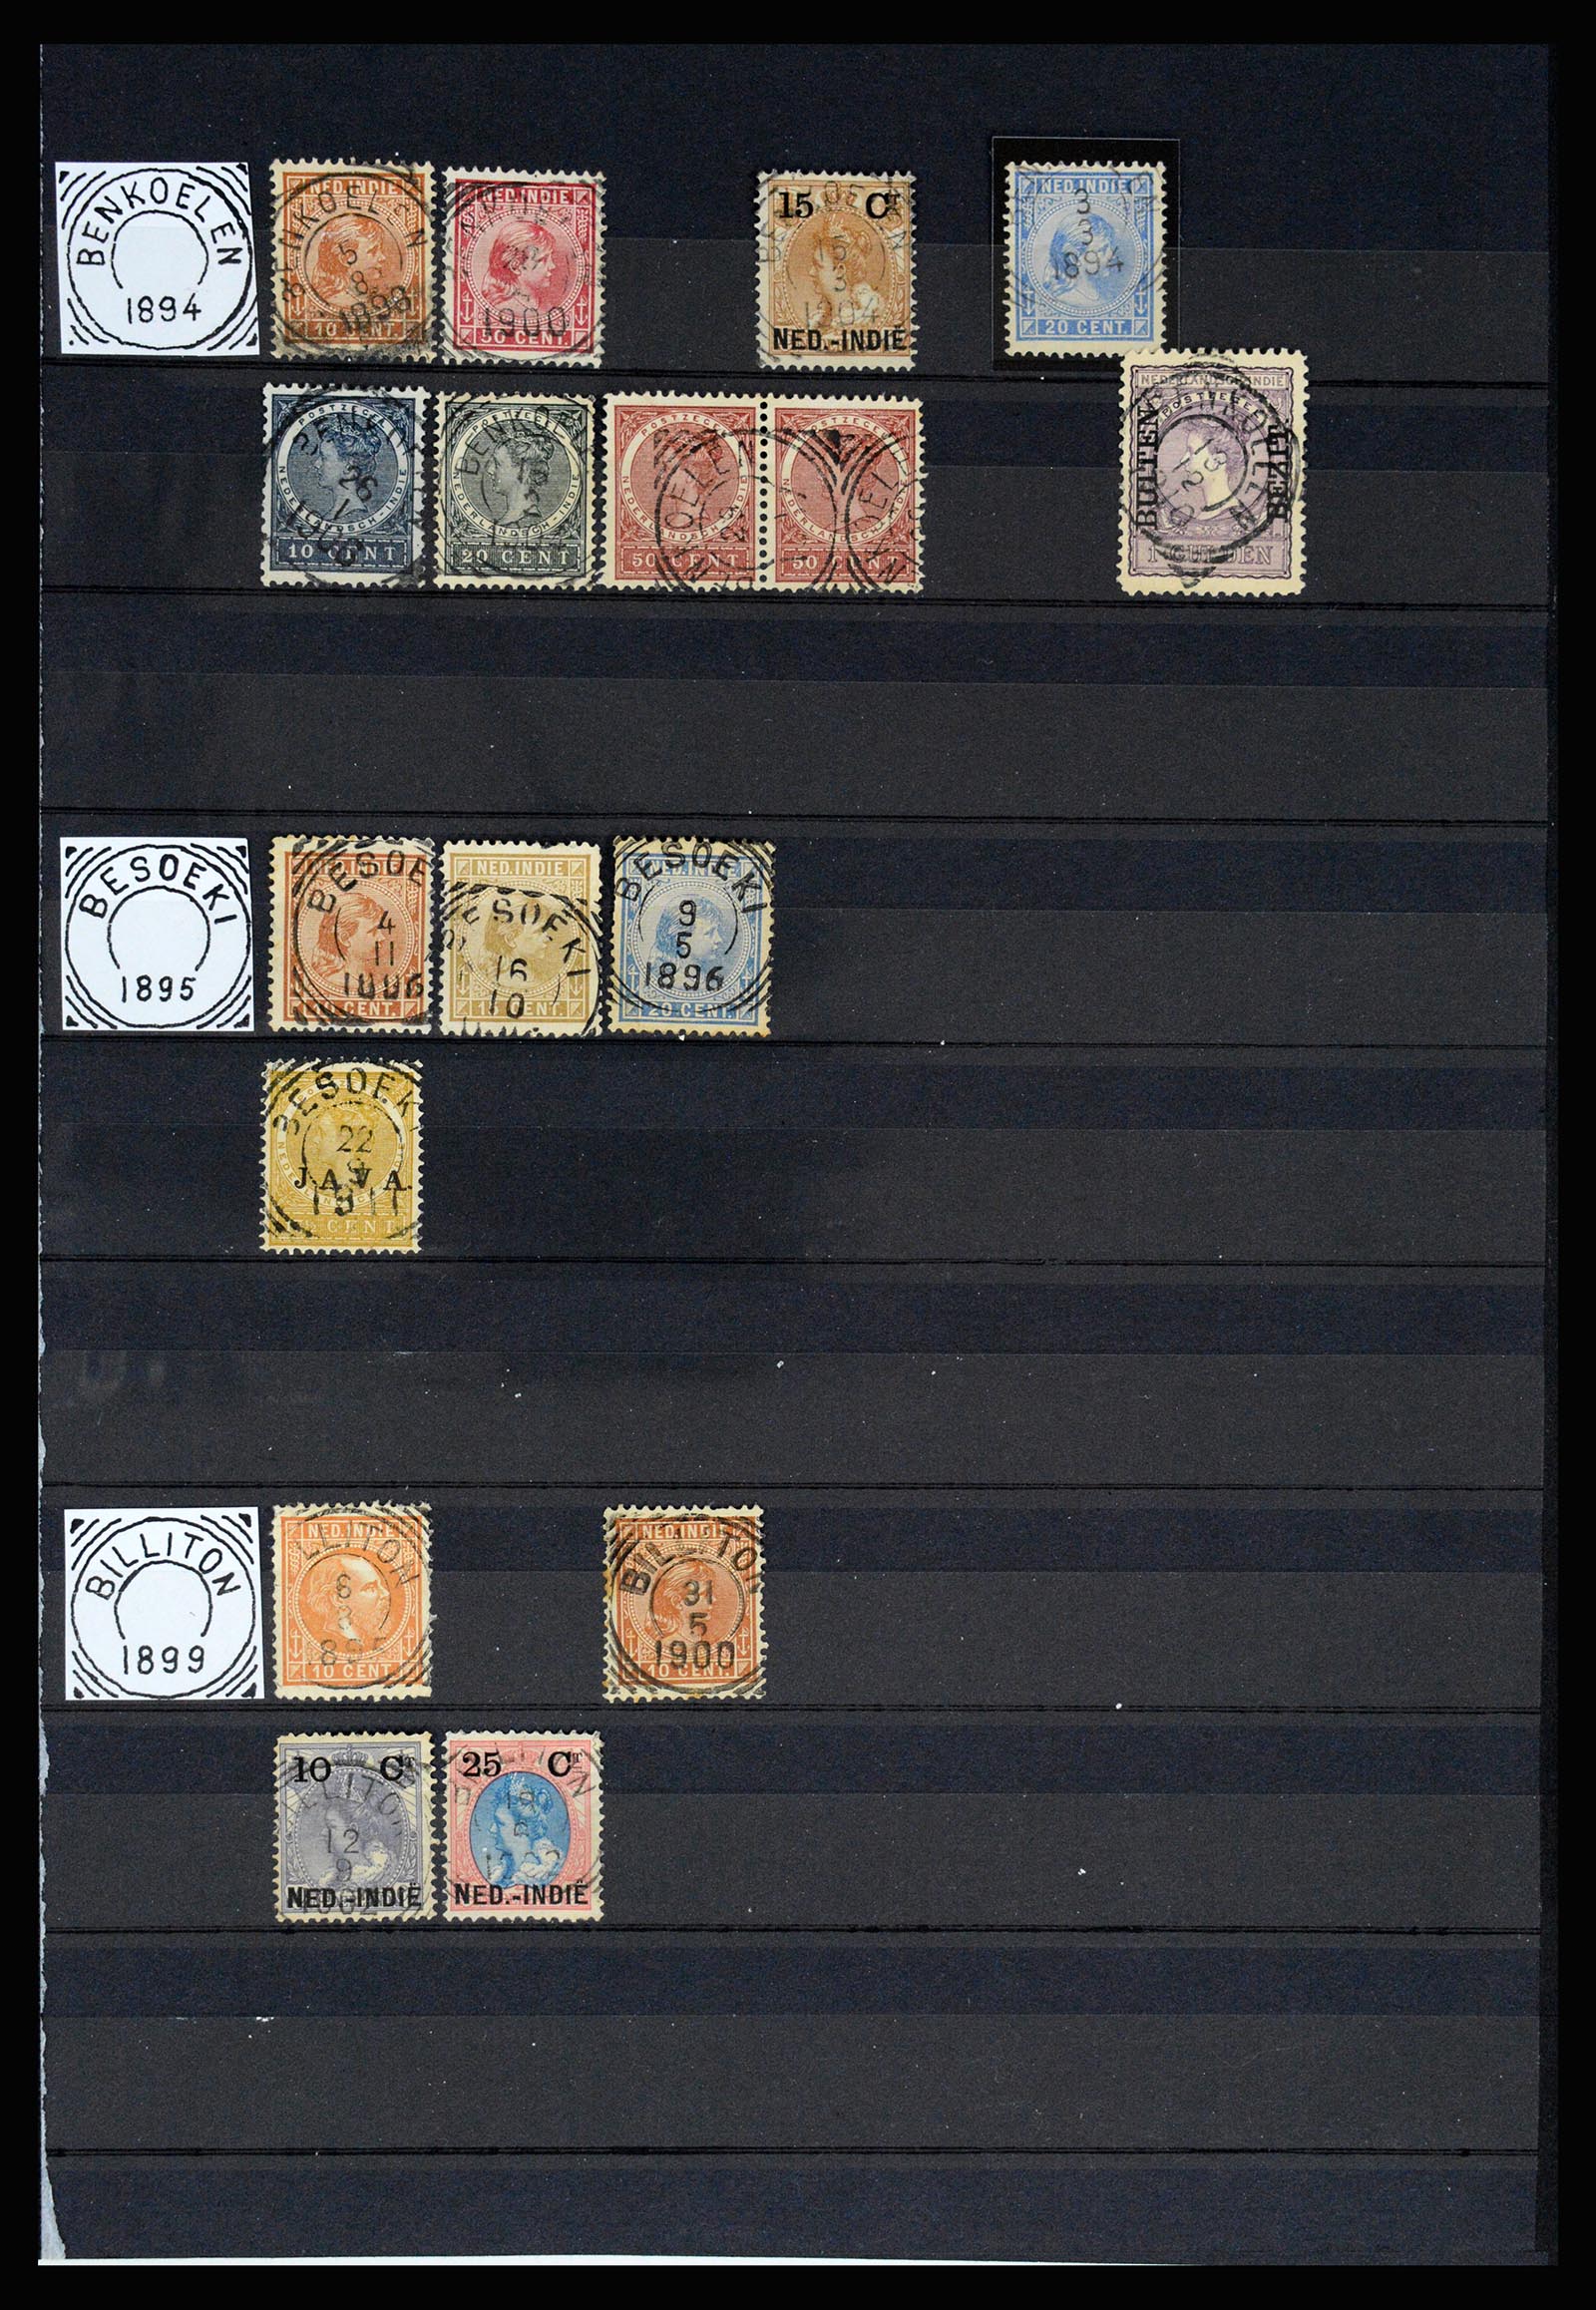 36839 008 - Stamp collection 36839 Dutch east Indies square cancels.